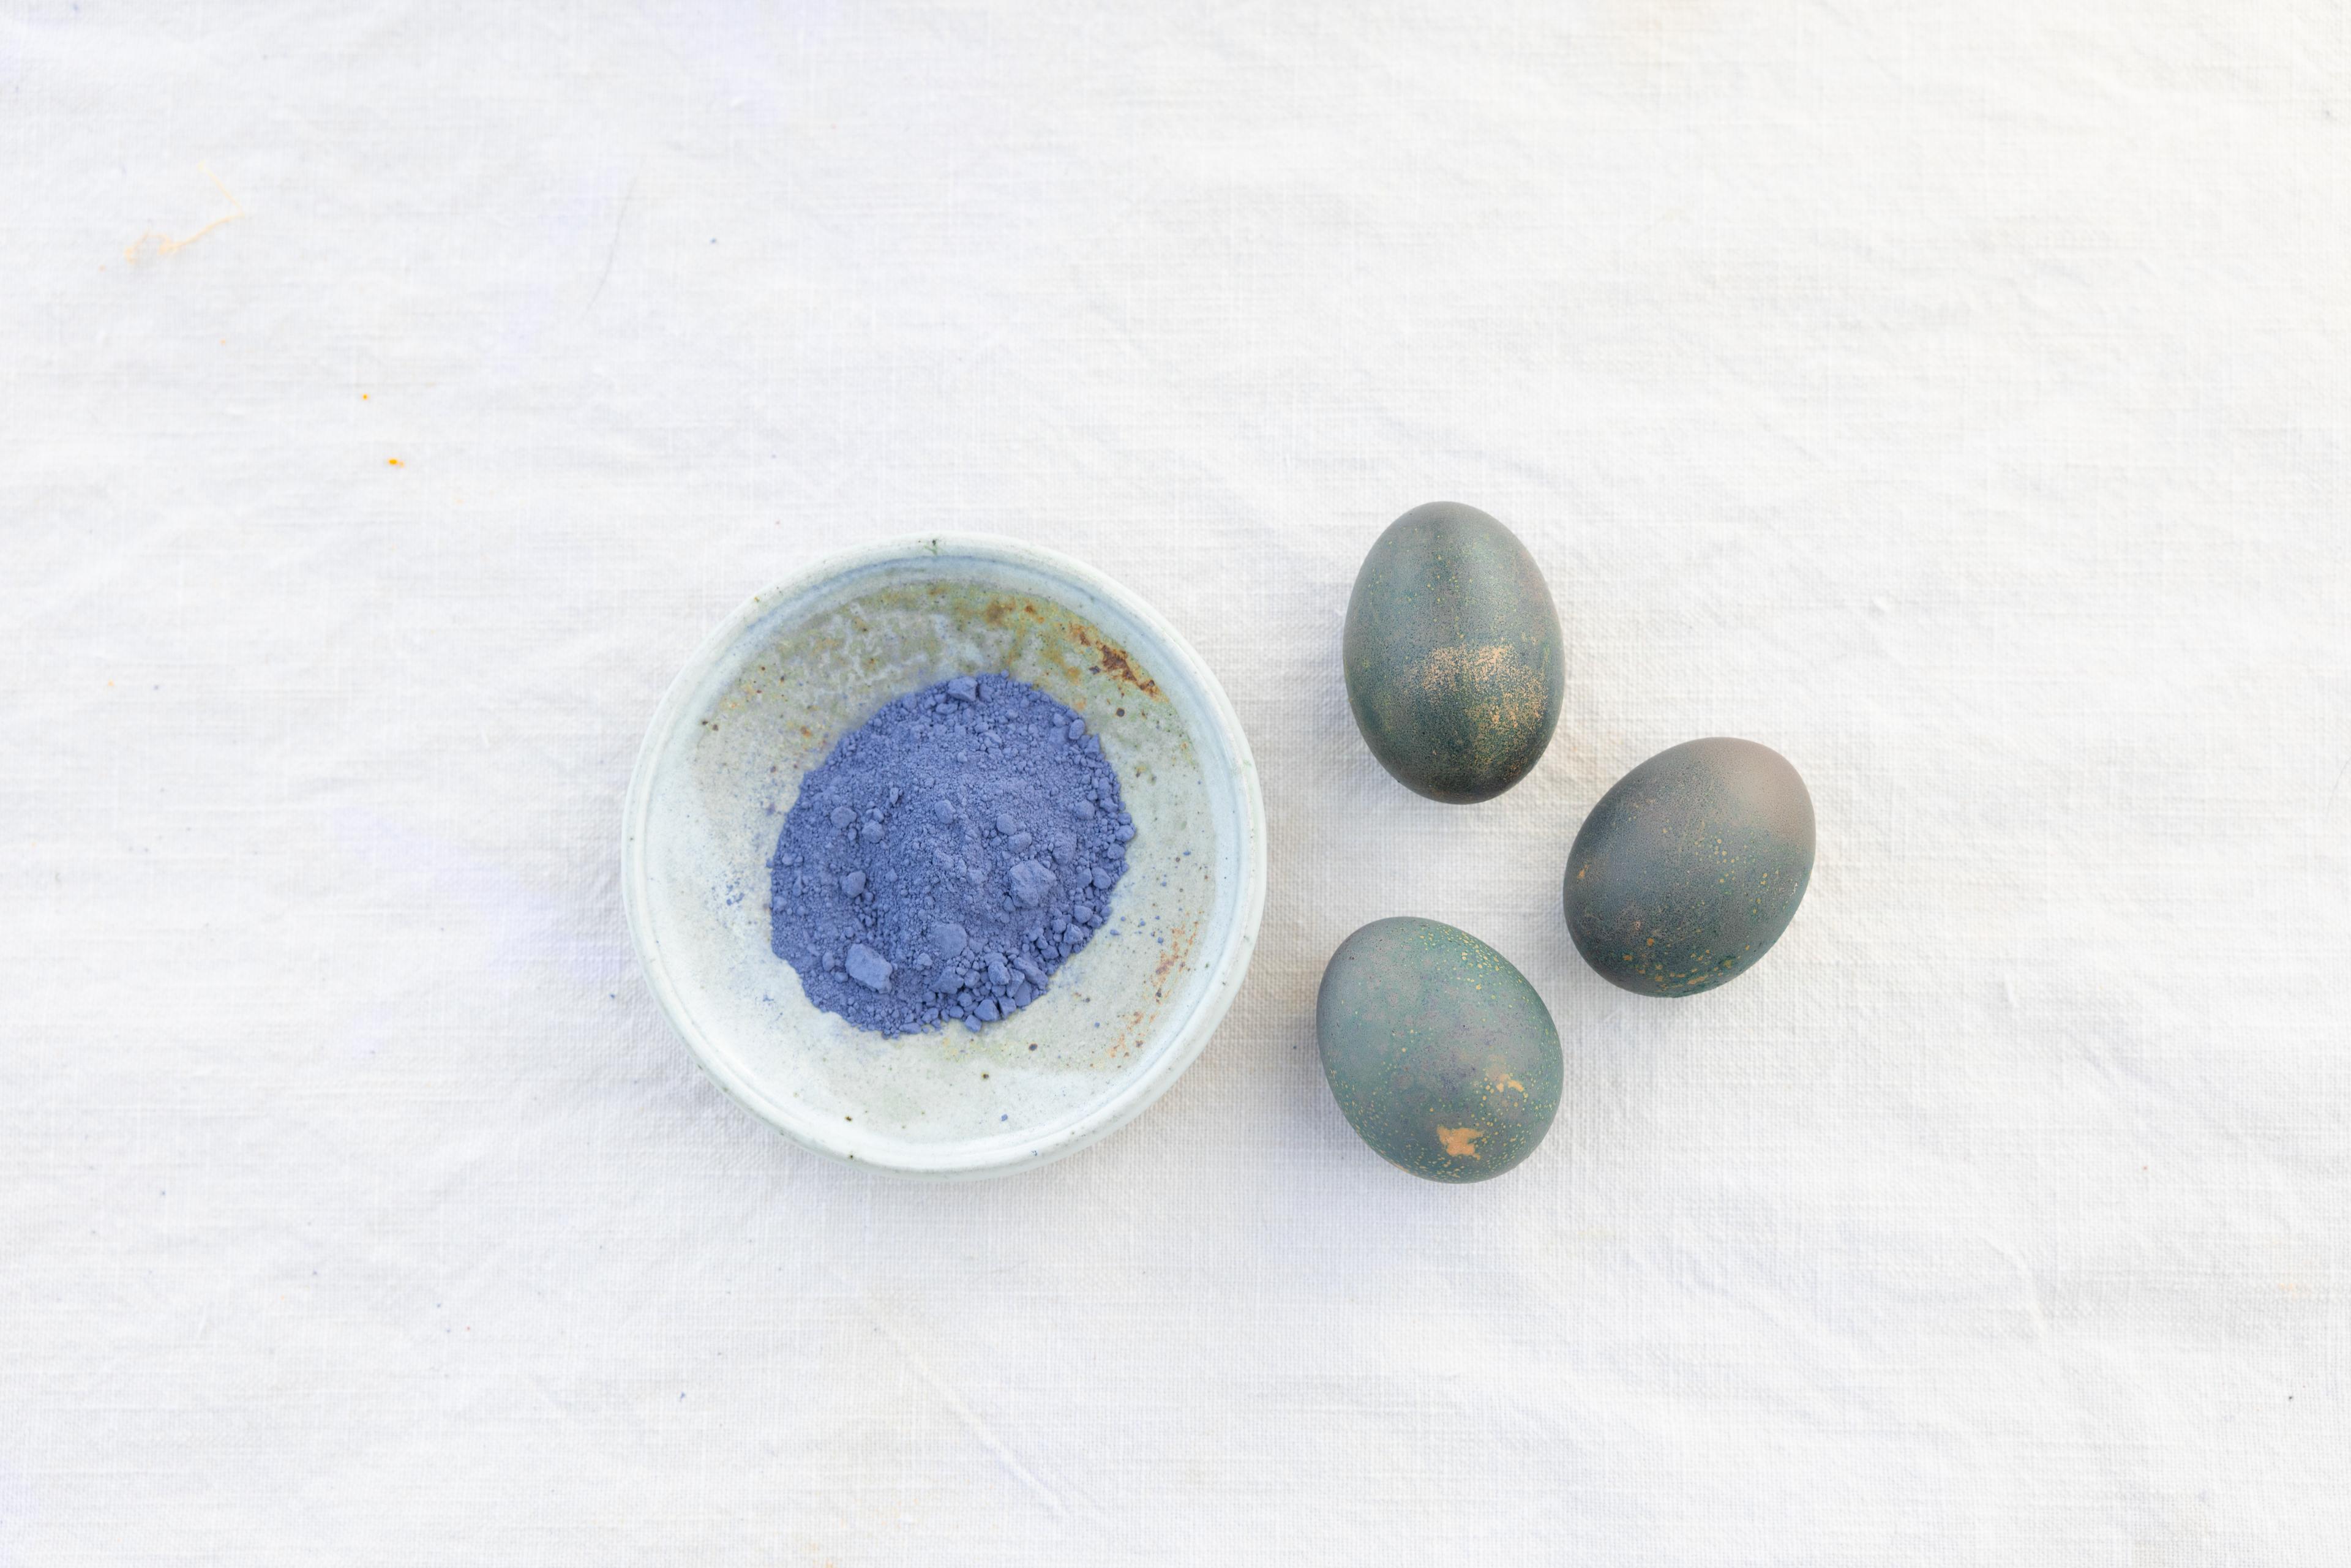 Eggs dyed with butterfly pea flower powder